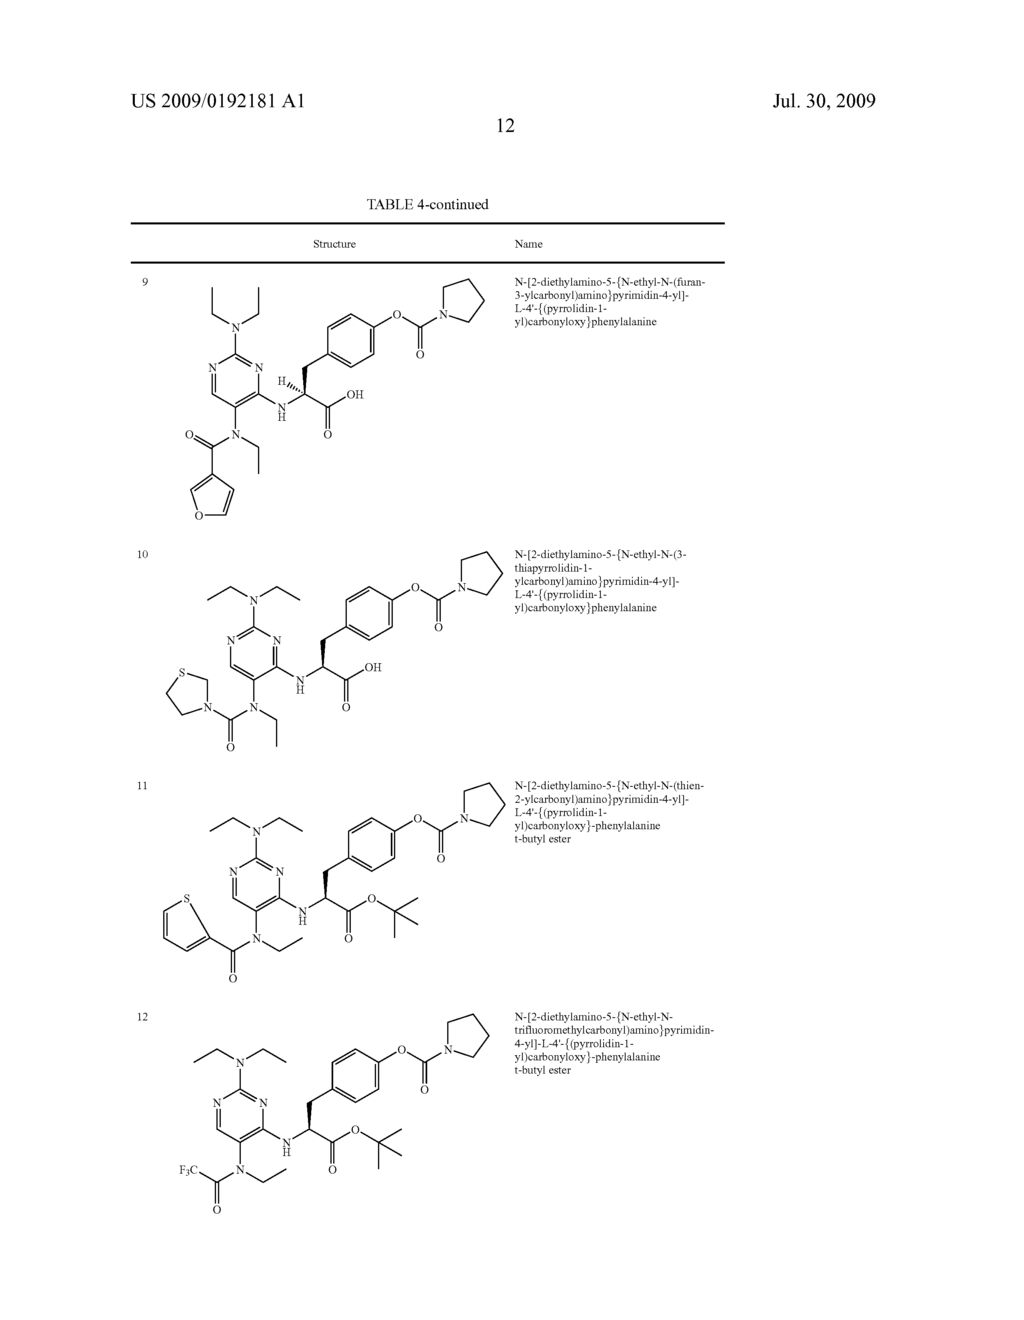 PYRIMIDINYL AMIDE COMPOUNDS WHICH INHIBIT LEUKOCYTE ADHESION MEDIATED BY VLA-4 - diagram, schematic, and image 13